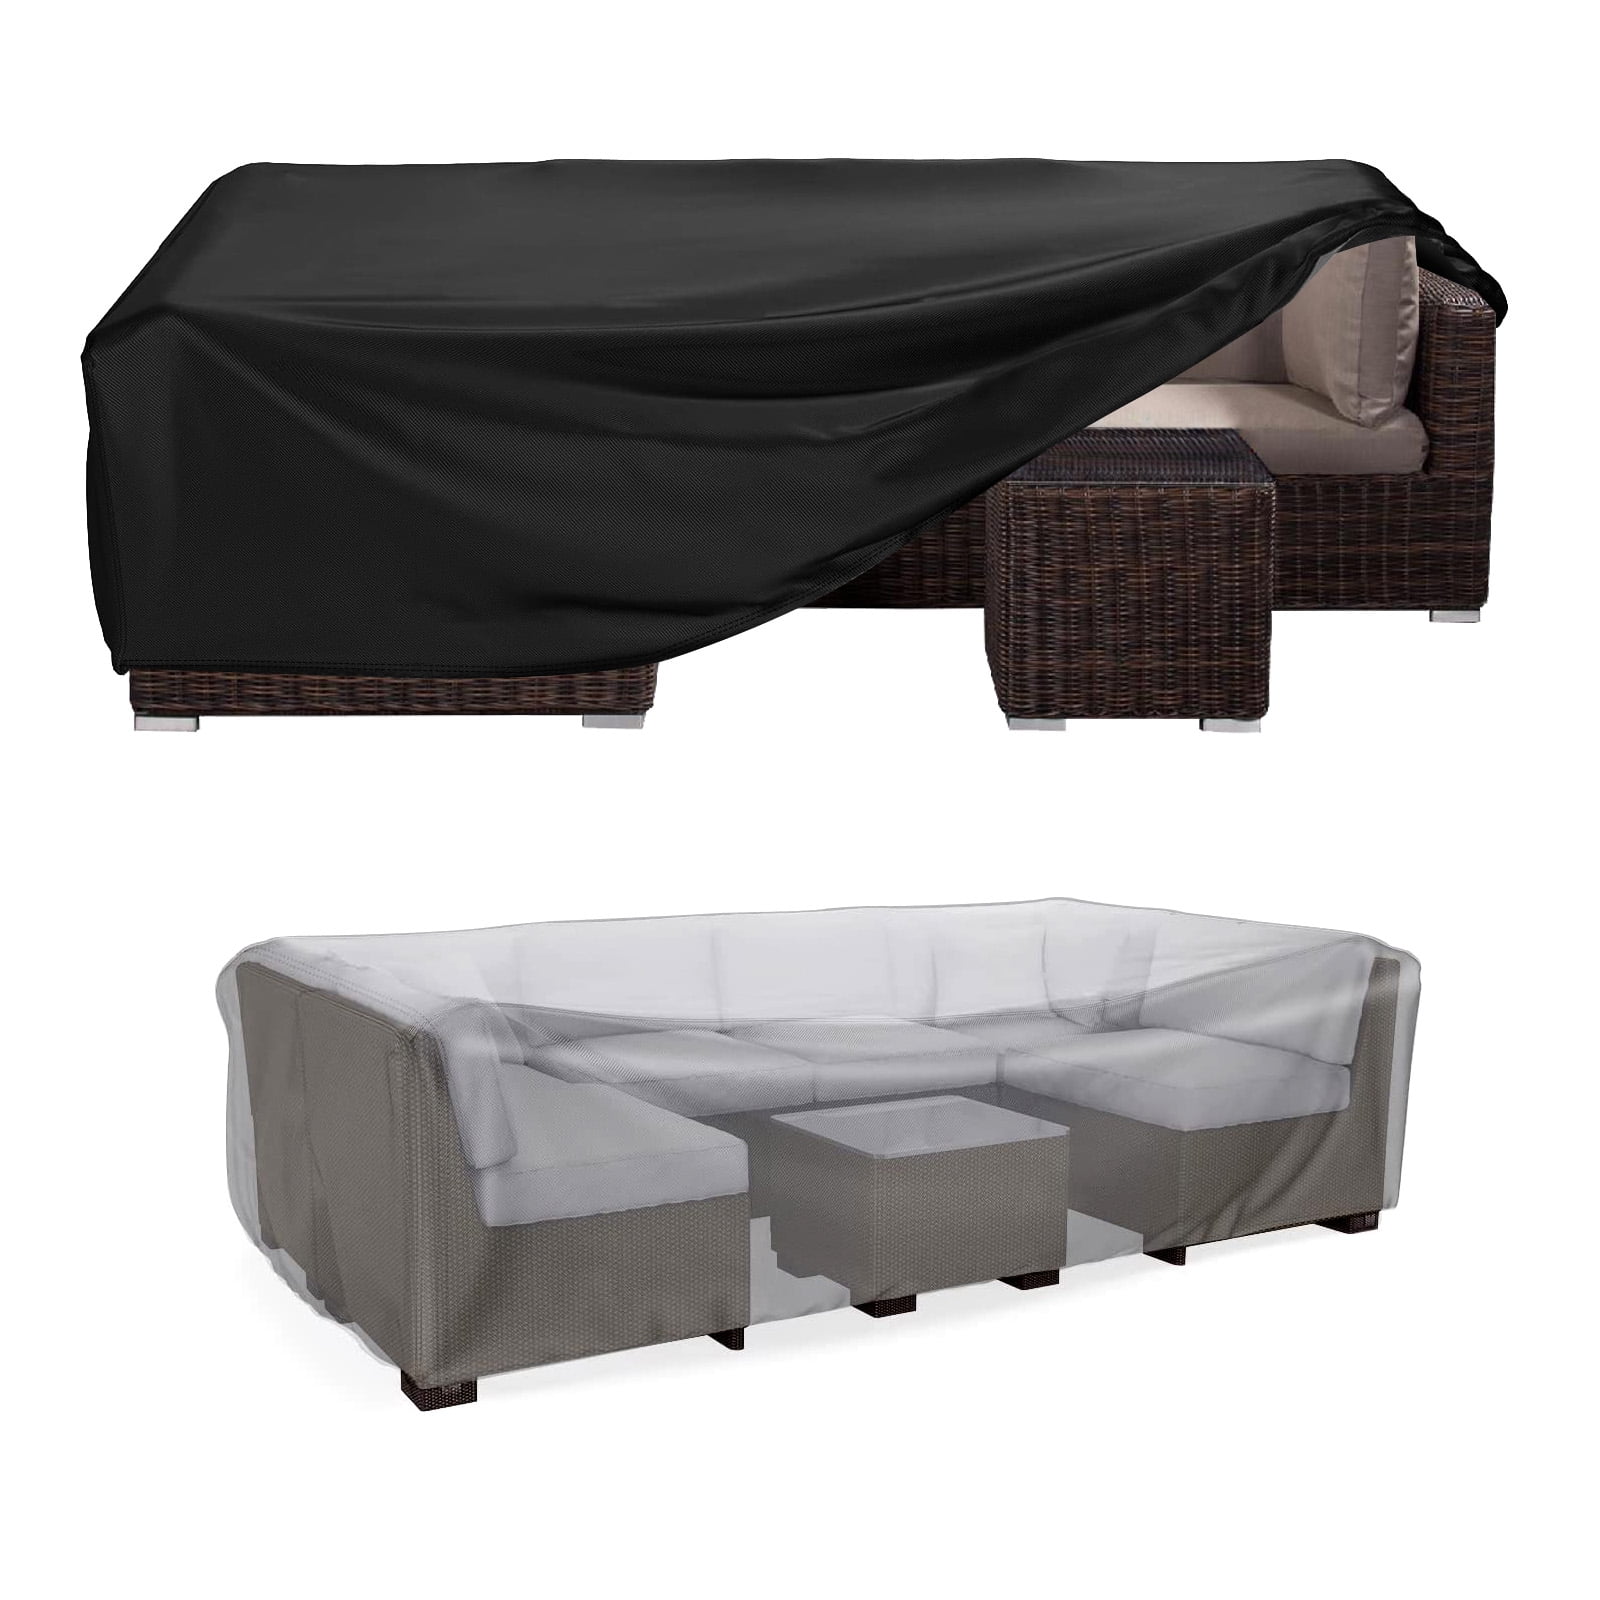 Details about   Waterproof Garden Patio Furniture Cover Rattan Table Seat Set Protective Outdoor 